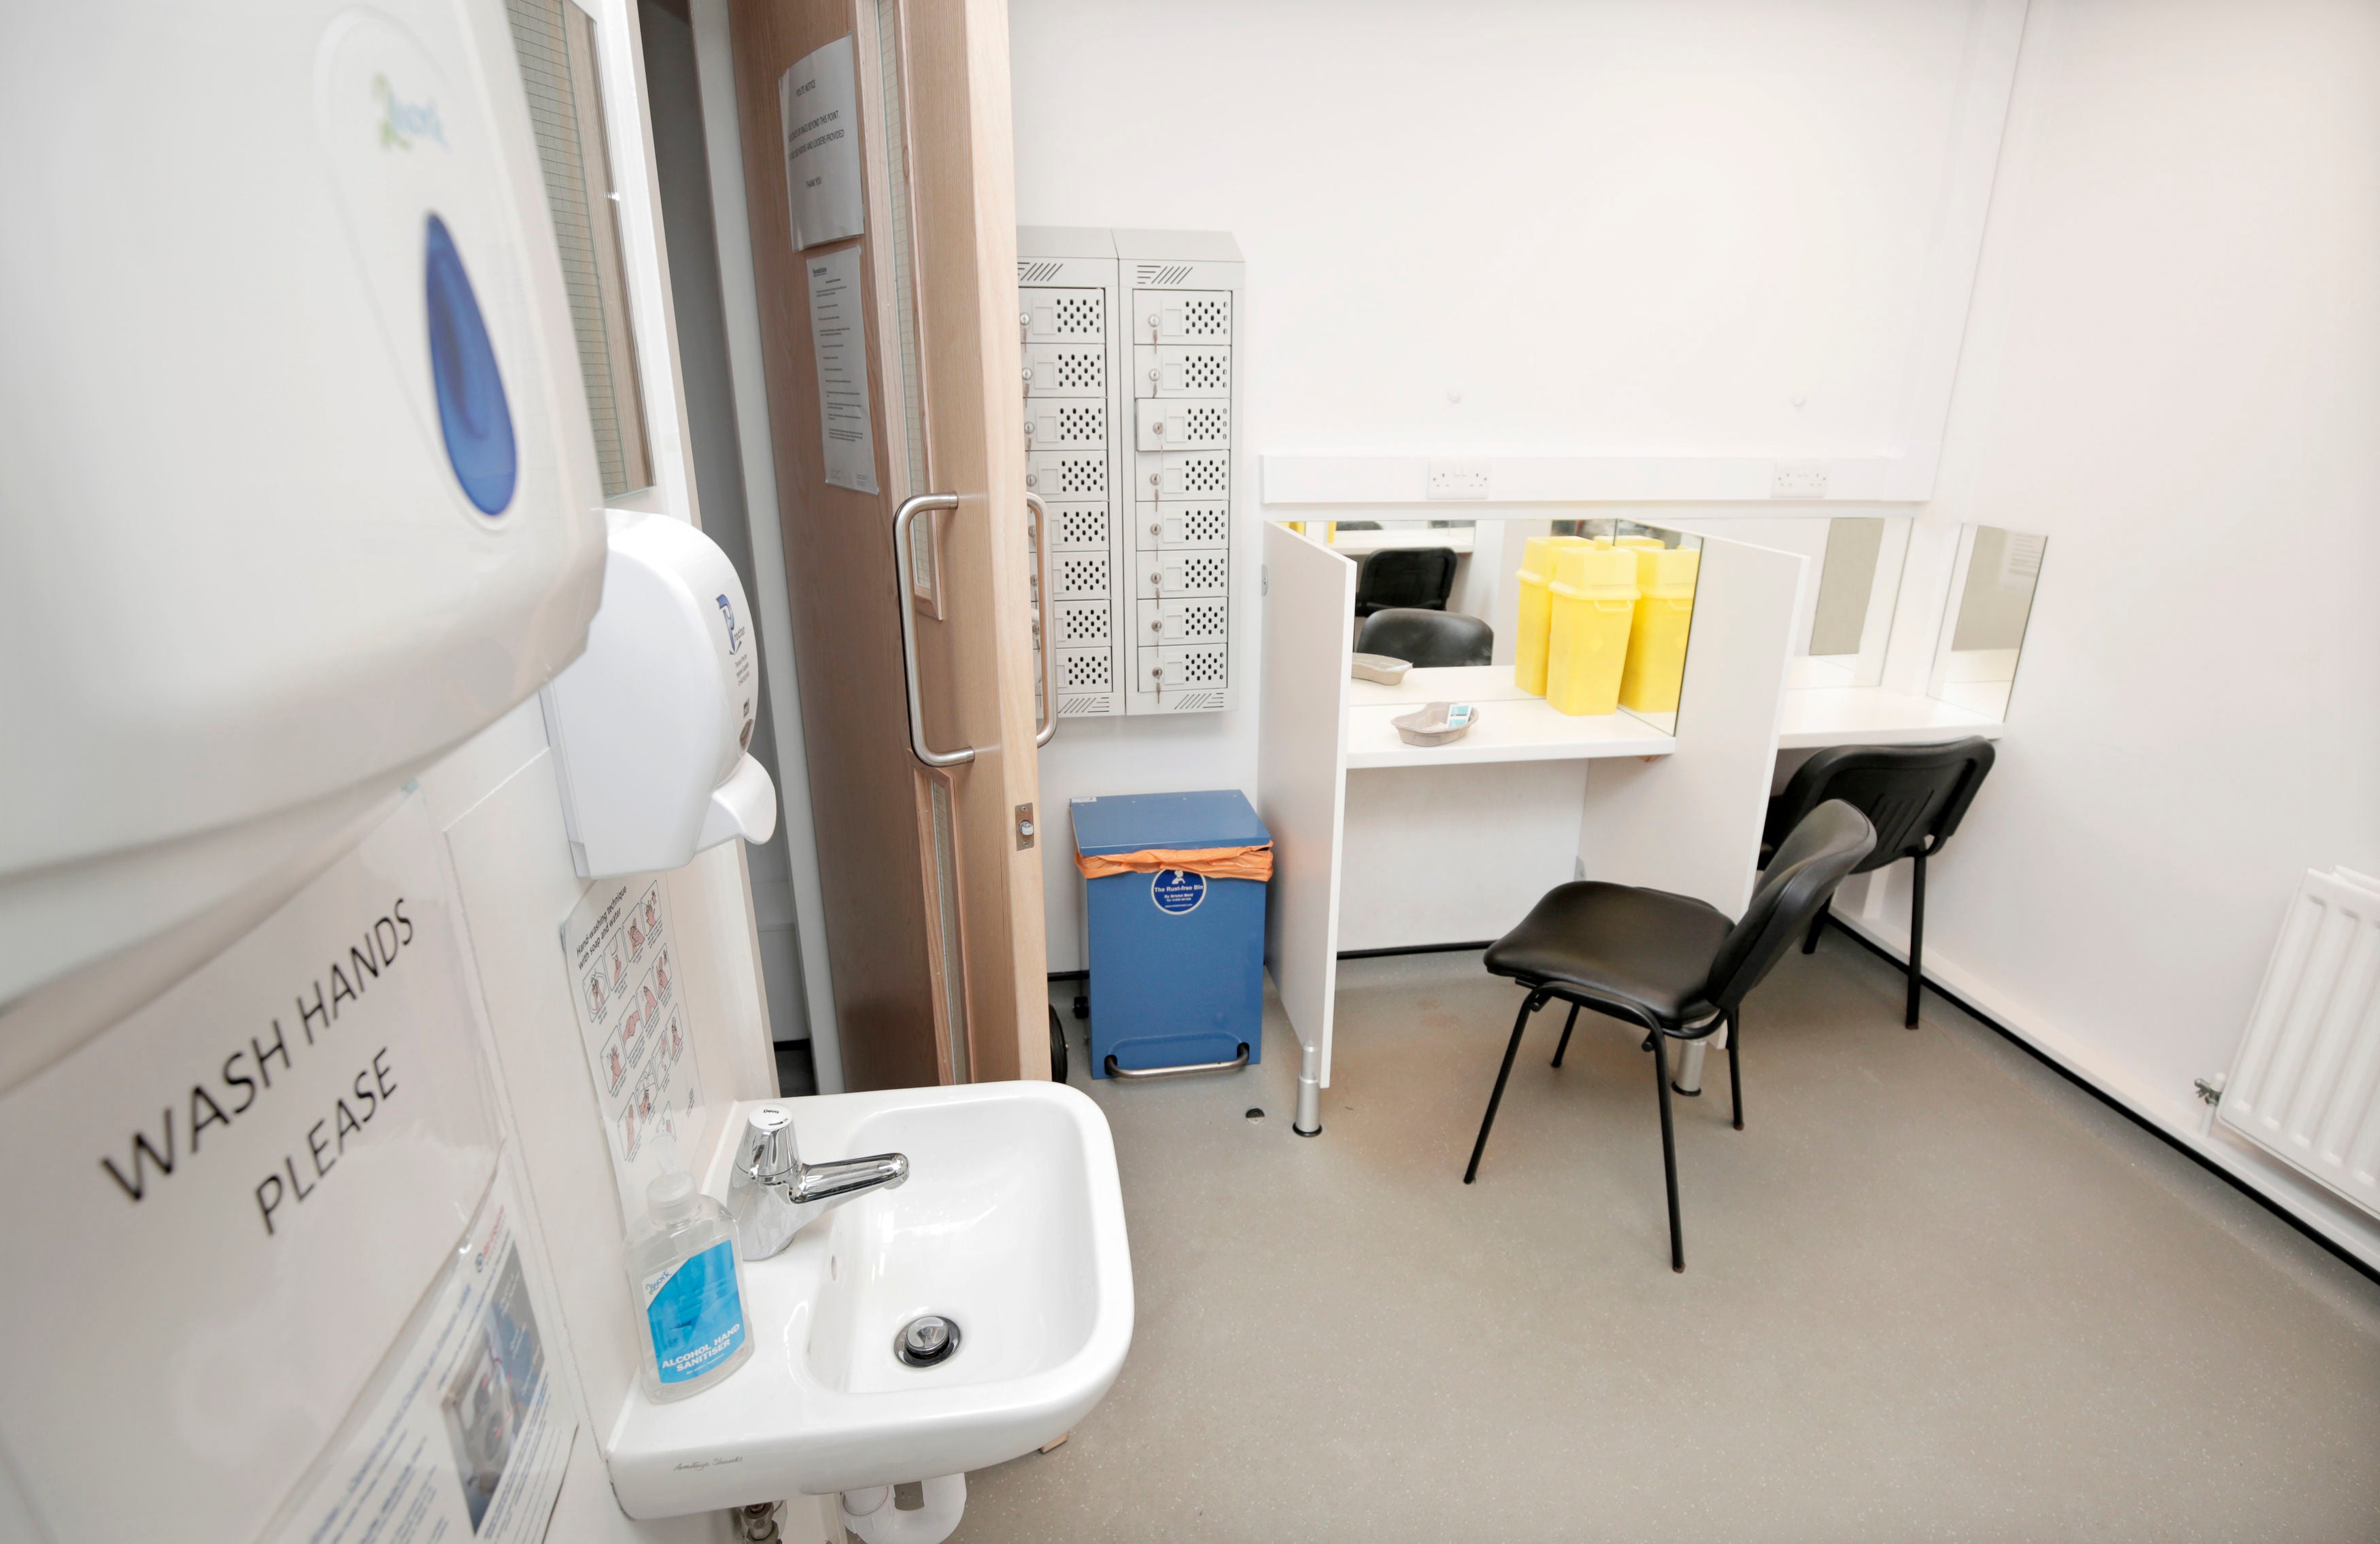 Middlesbrough’s heroin assisted treatment centre